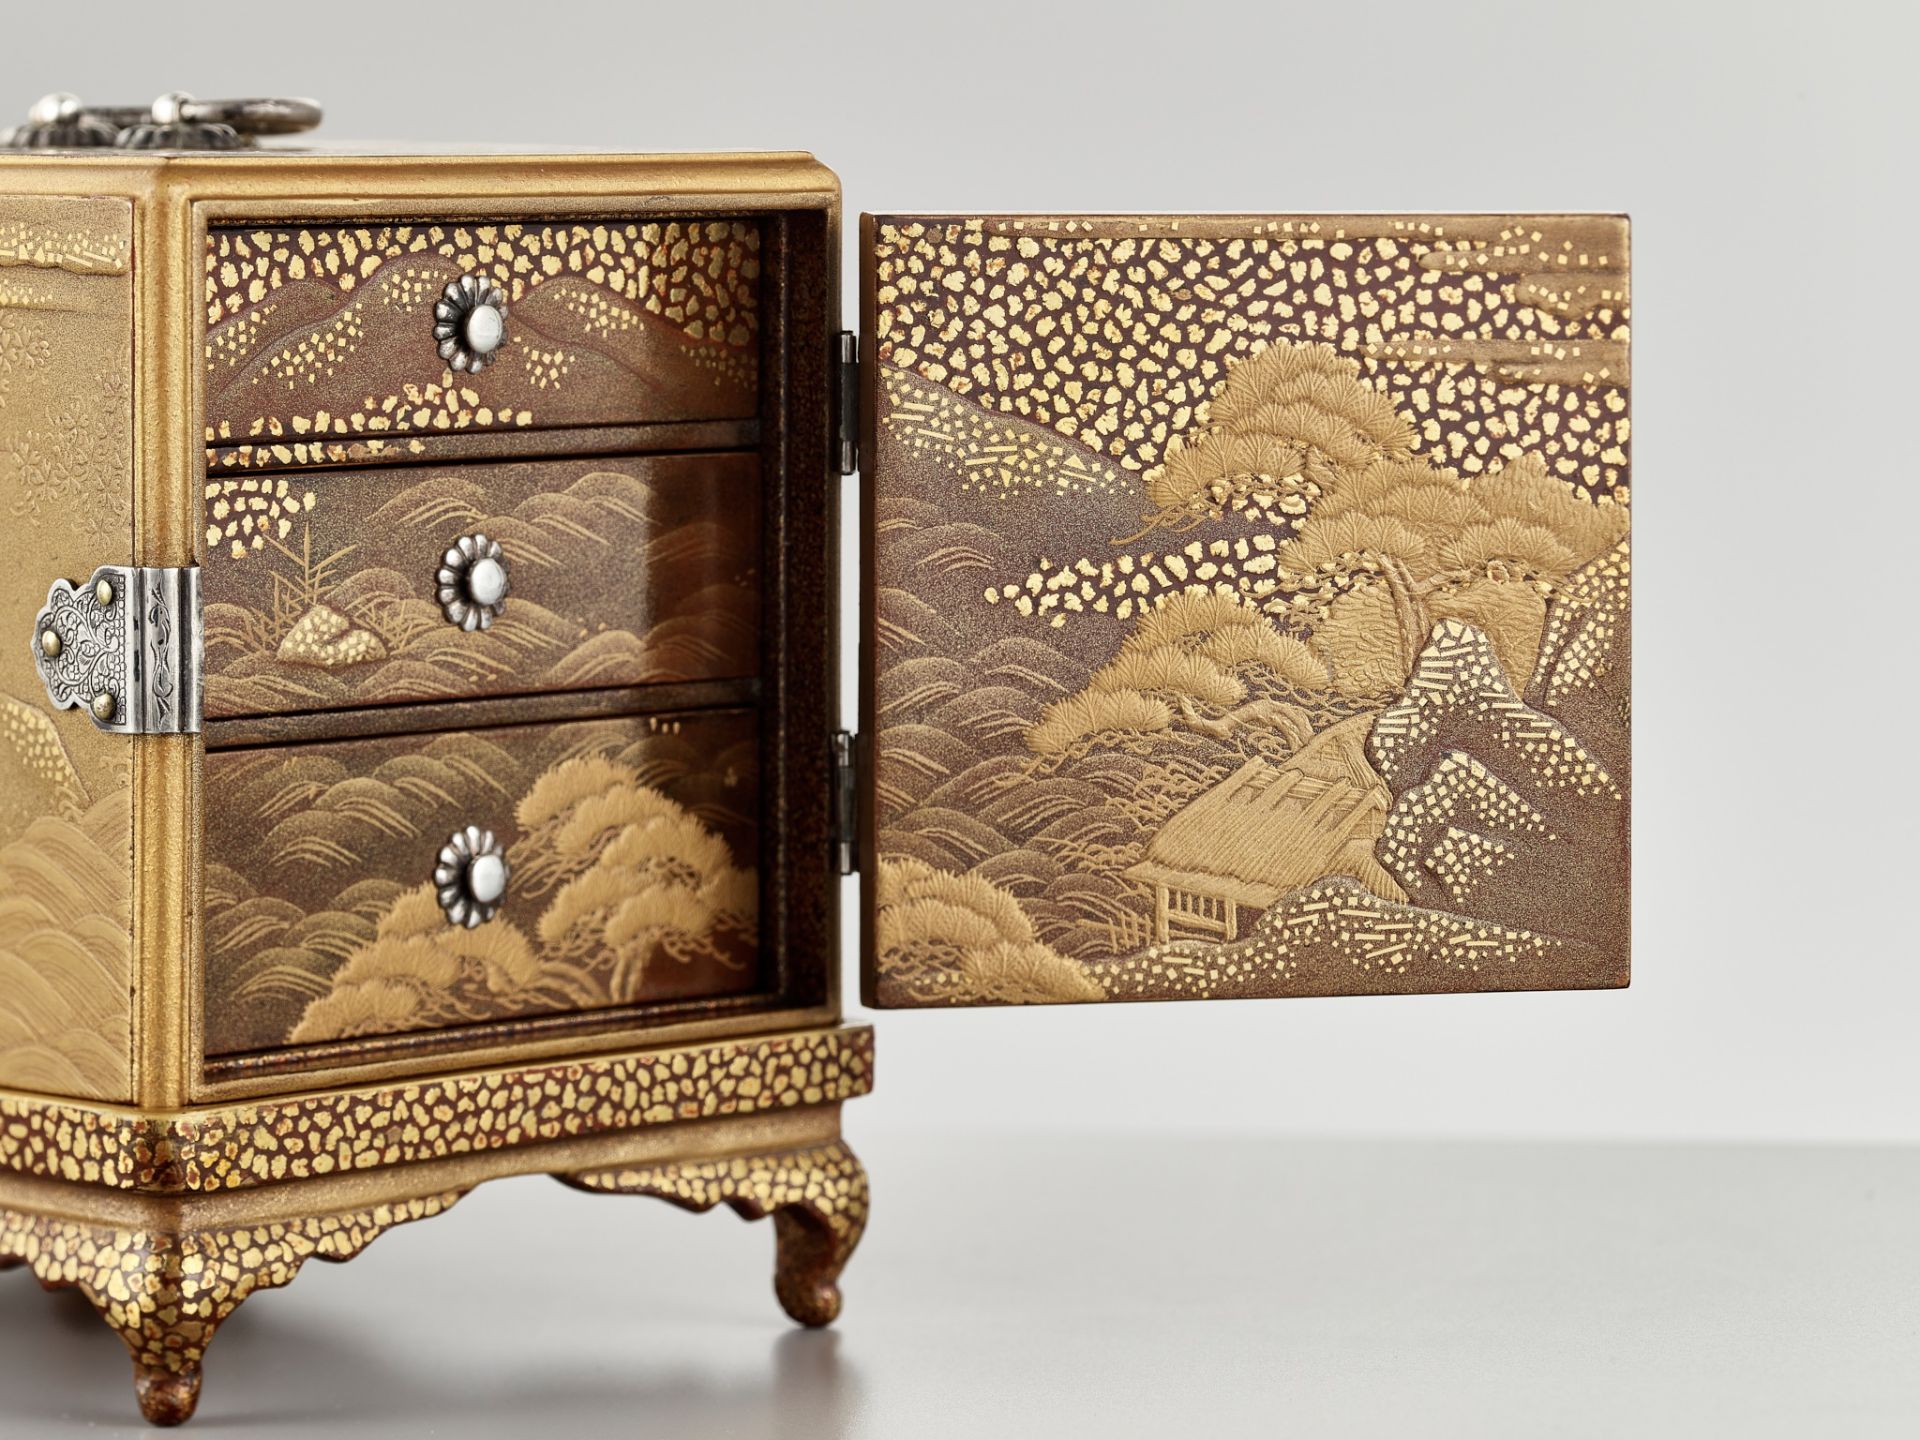 A SUPERB LACQUER MINIATURE KODANSU (CABINET) DEPICTING THE NUNOBIKI FALLS WITH STAND - Image 6 of 12